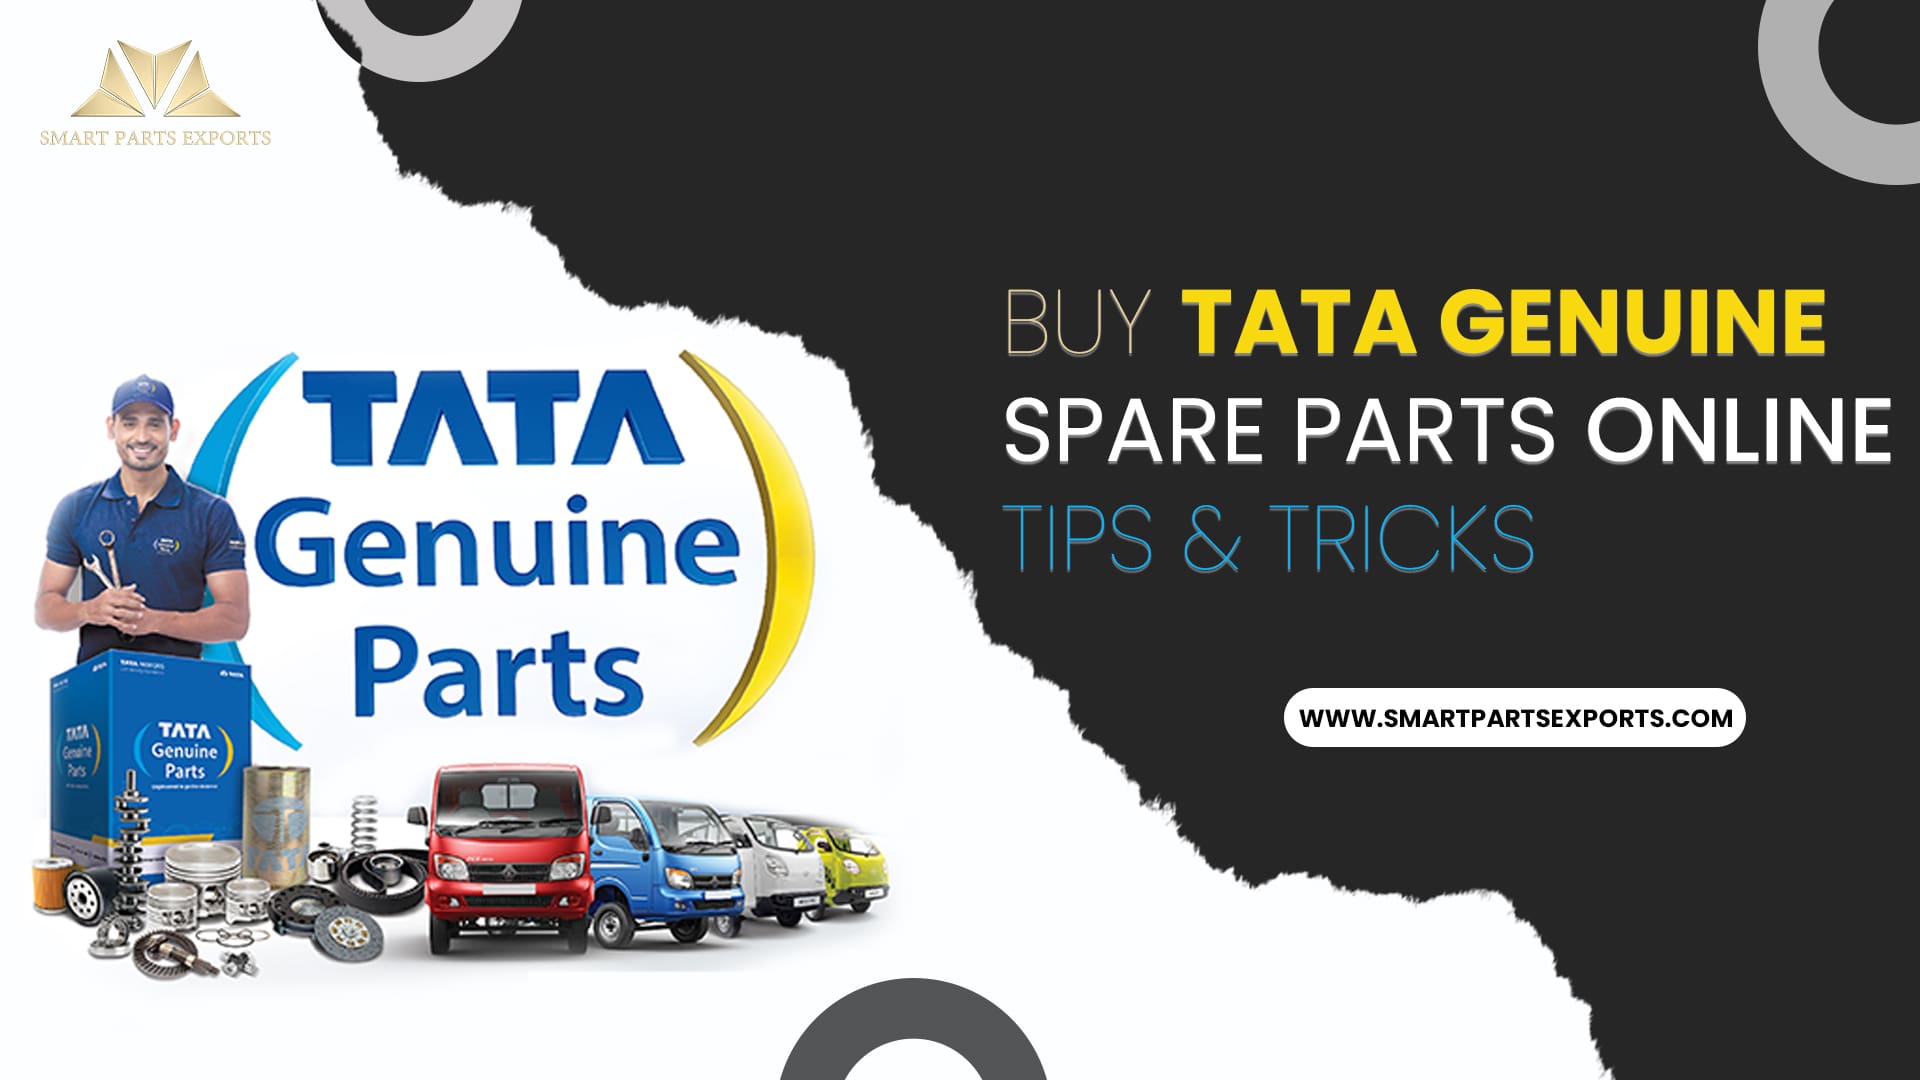 Buy TATA Genuine Spare Parts Online: Tips & Tricks to Follow